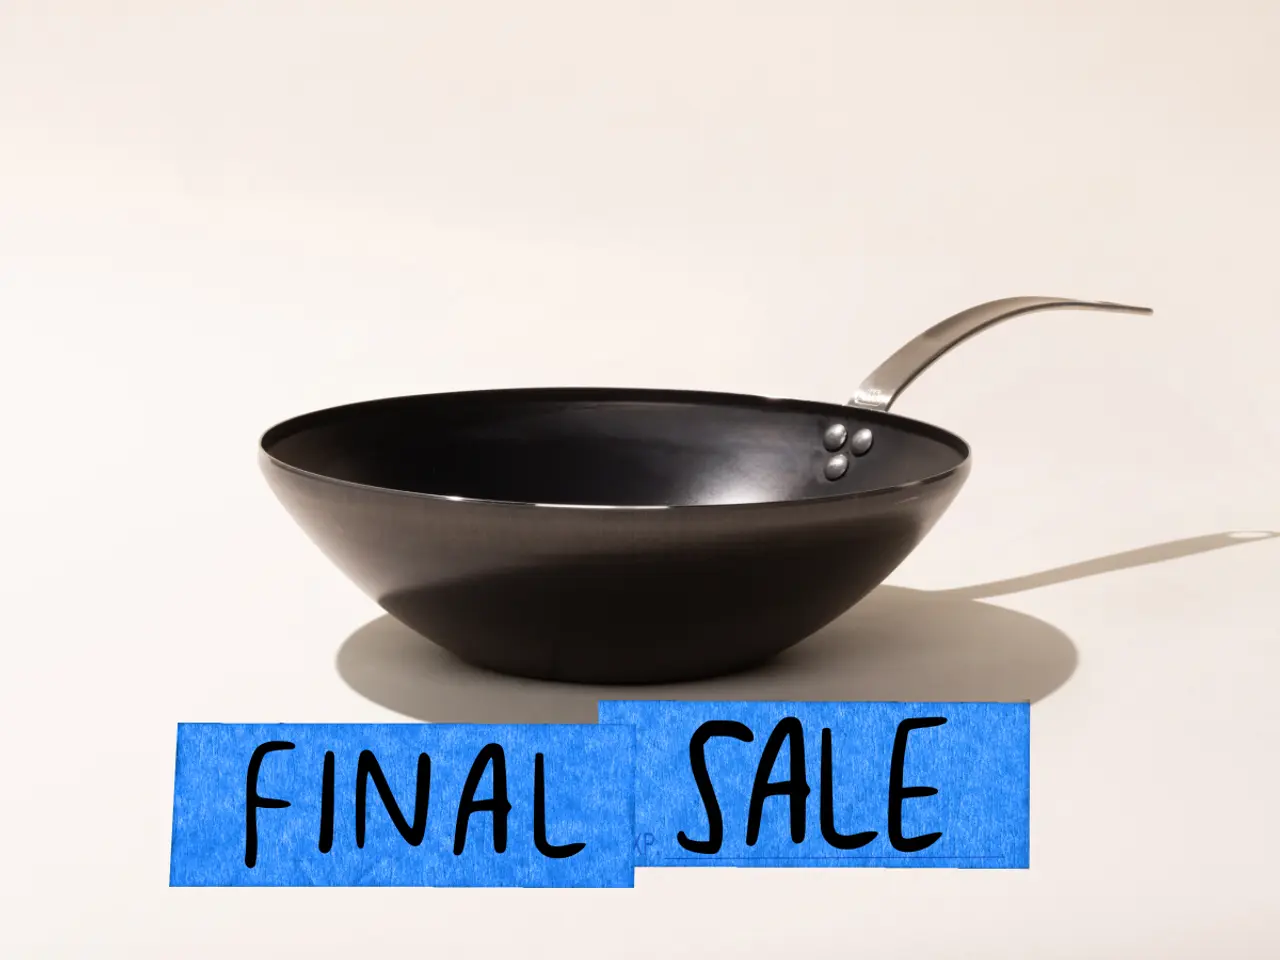 A black frying pan is featured against a neutral background with a blue "FINAL SALE" sign placed in front of it.